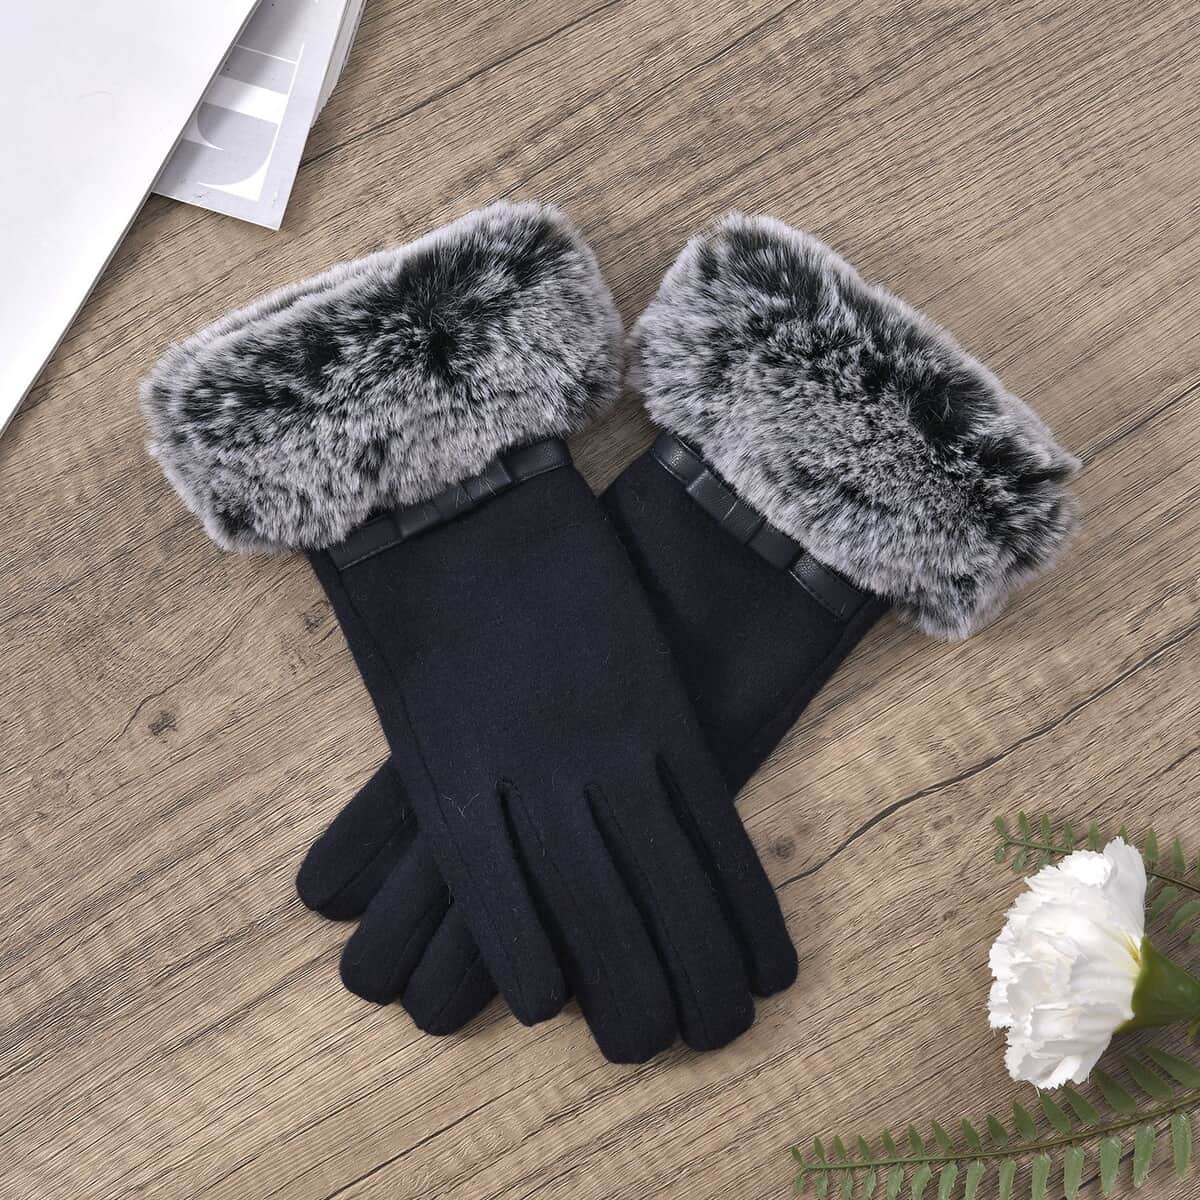 Navy cashmere gloves with faux fur with Touch screen function (9.05"x3.54") image number 1